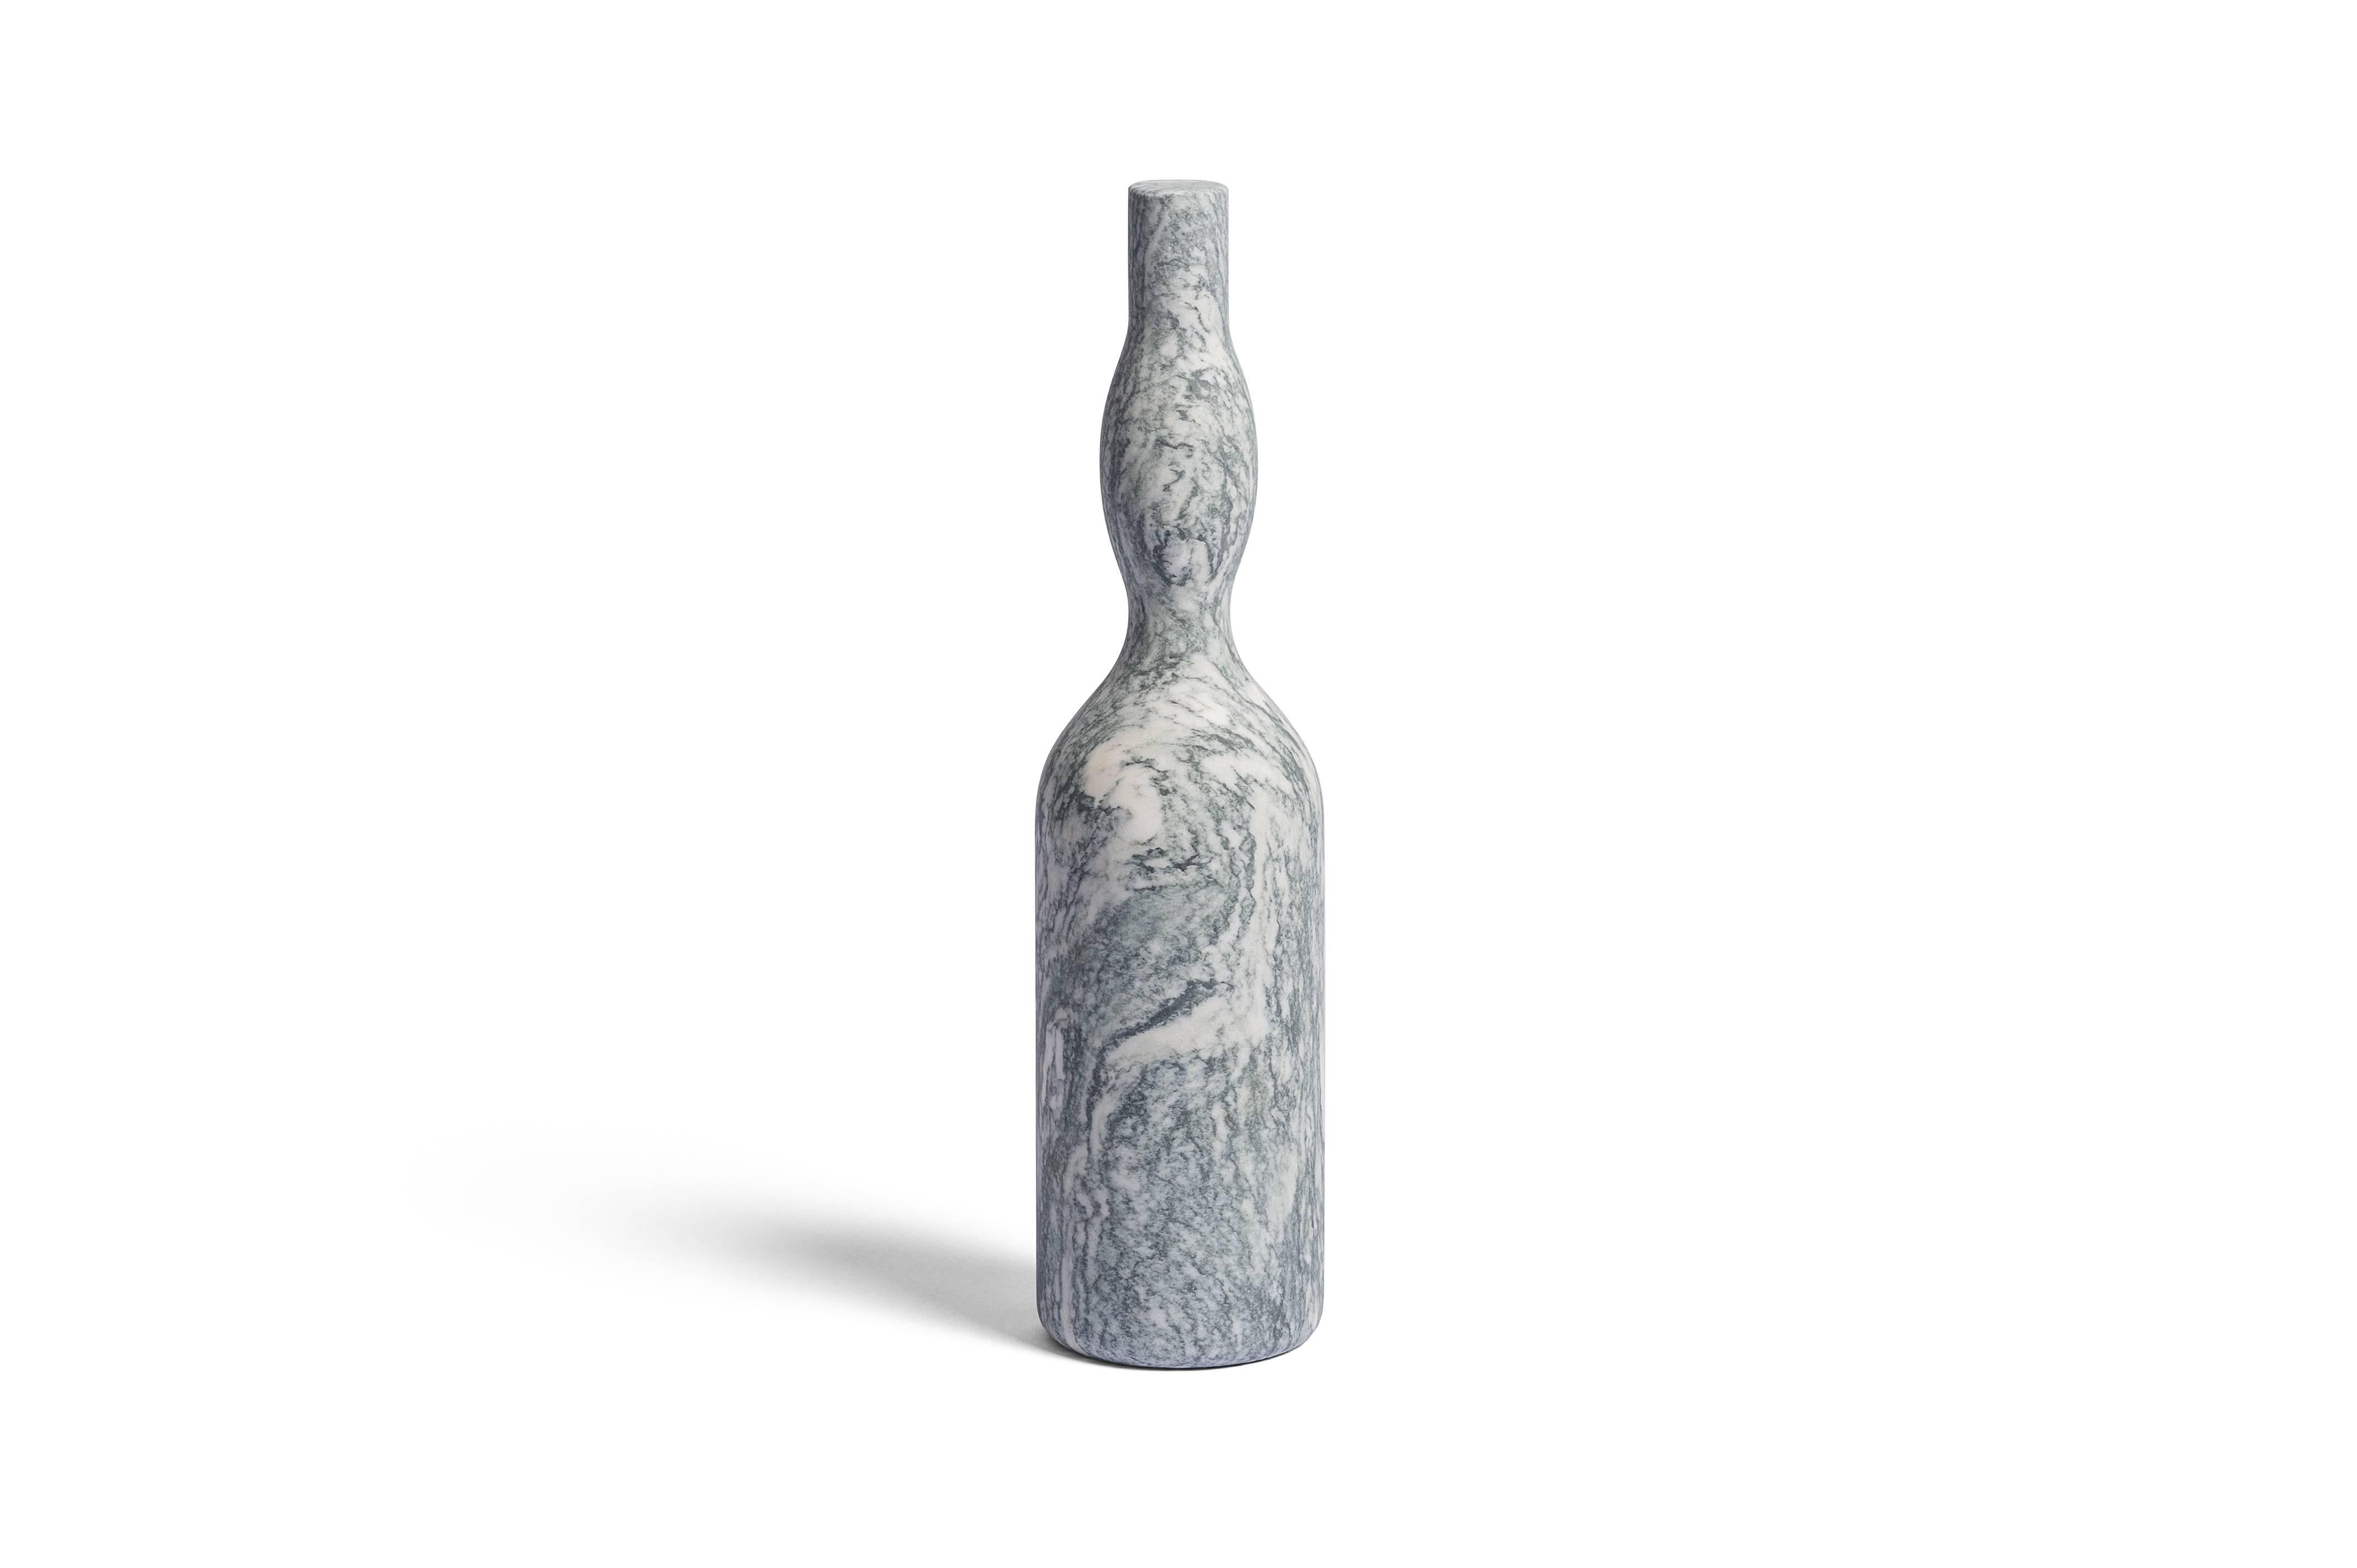 Inspired by the array of different types of stone she encountered working with Salvatori, designer Elisa Ossino has drawn upon the simplicity of form of Morandi’s still life images, reproducing them in stunning marble. From the classic elegance of